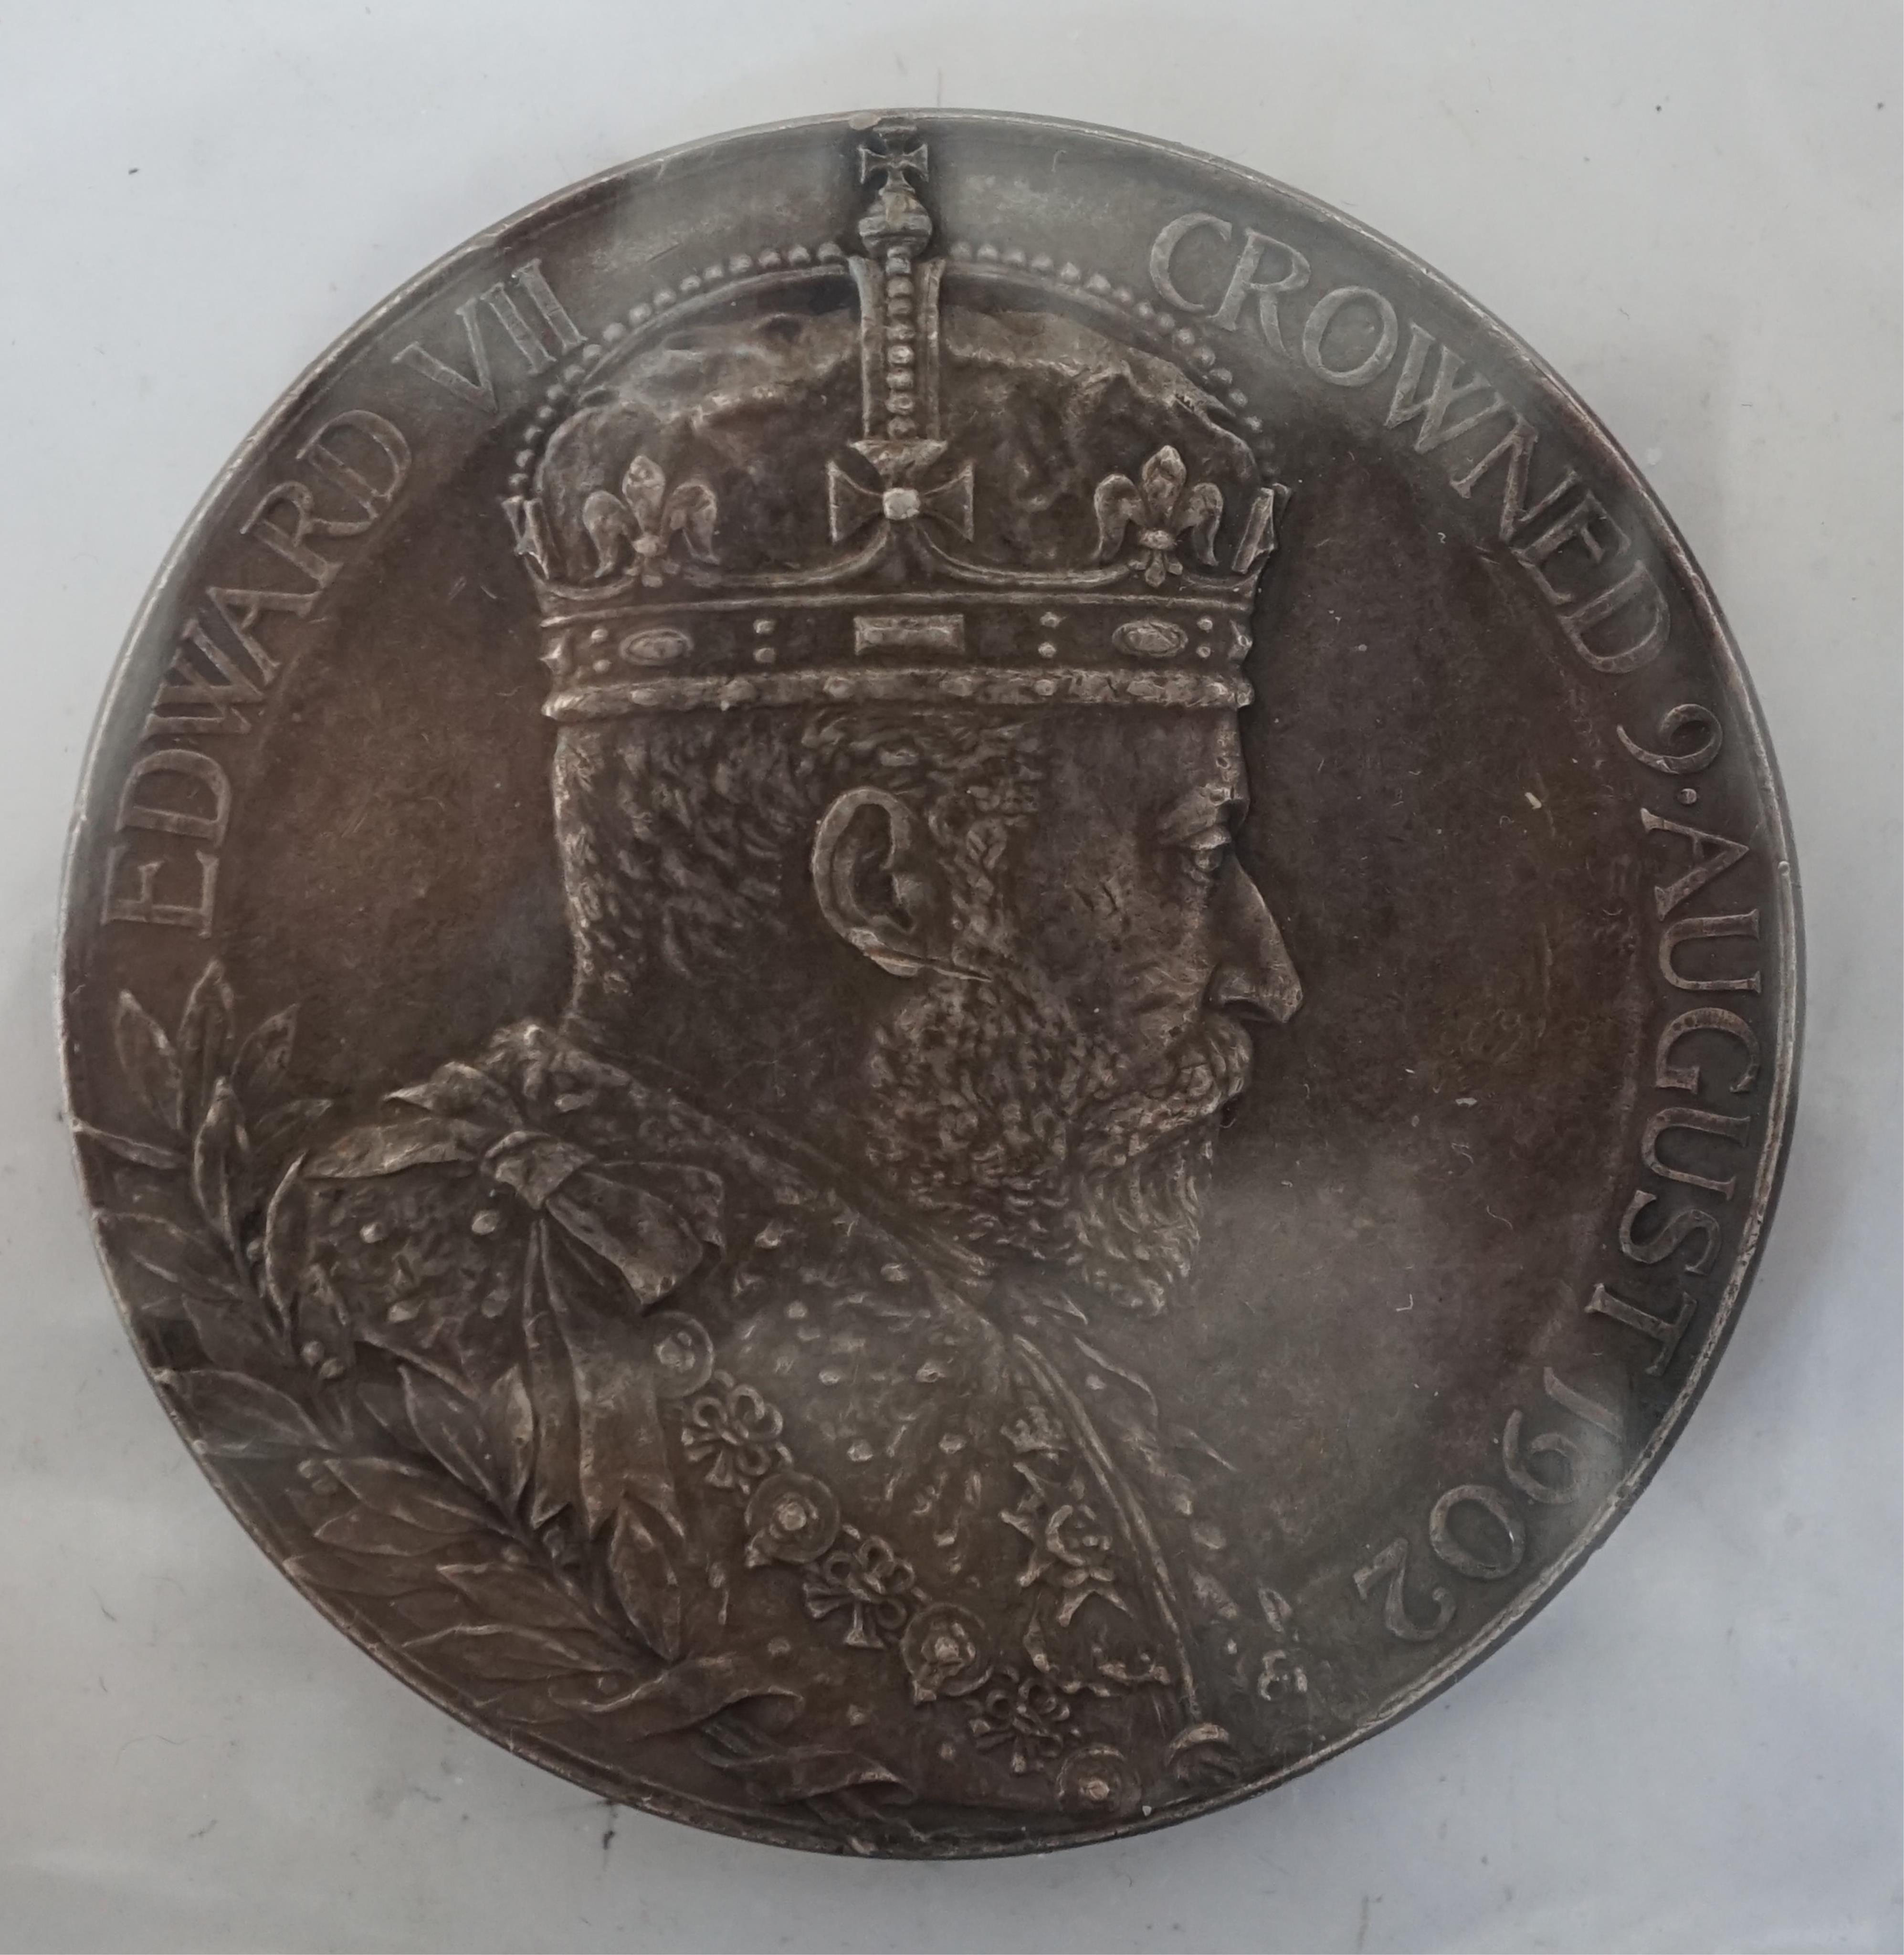 British Royal commemorative medals, Edward VII and Alexandra Queen Consort coronation silver medal 1902, about EF, ditto in bronze, toned EF, Victoria Diamond Jubilee bronze medal, EF and George V and Queen Mary coronati